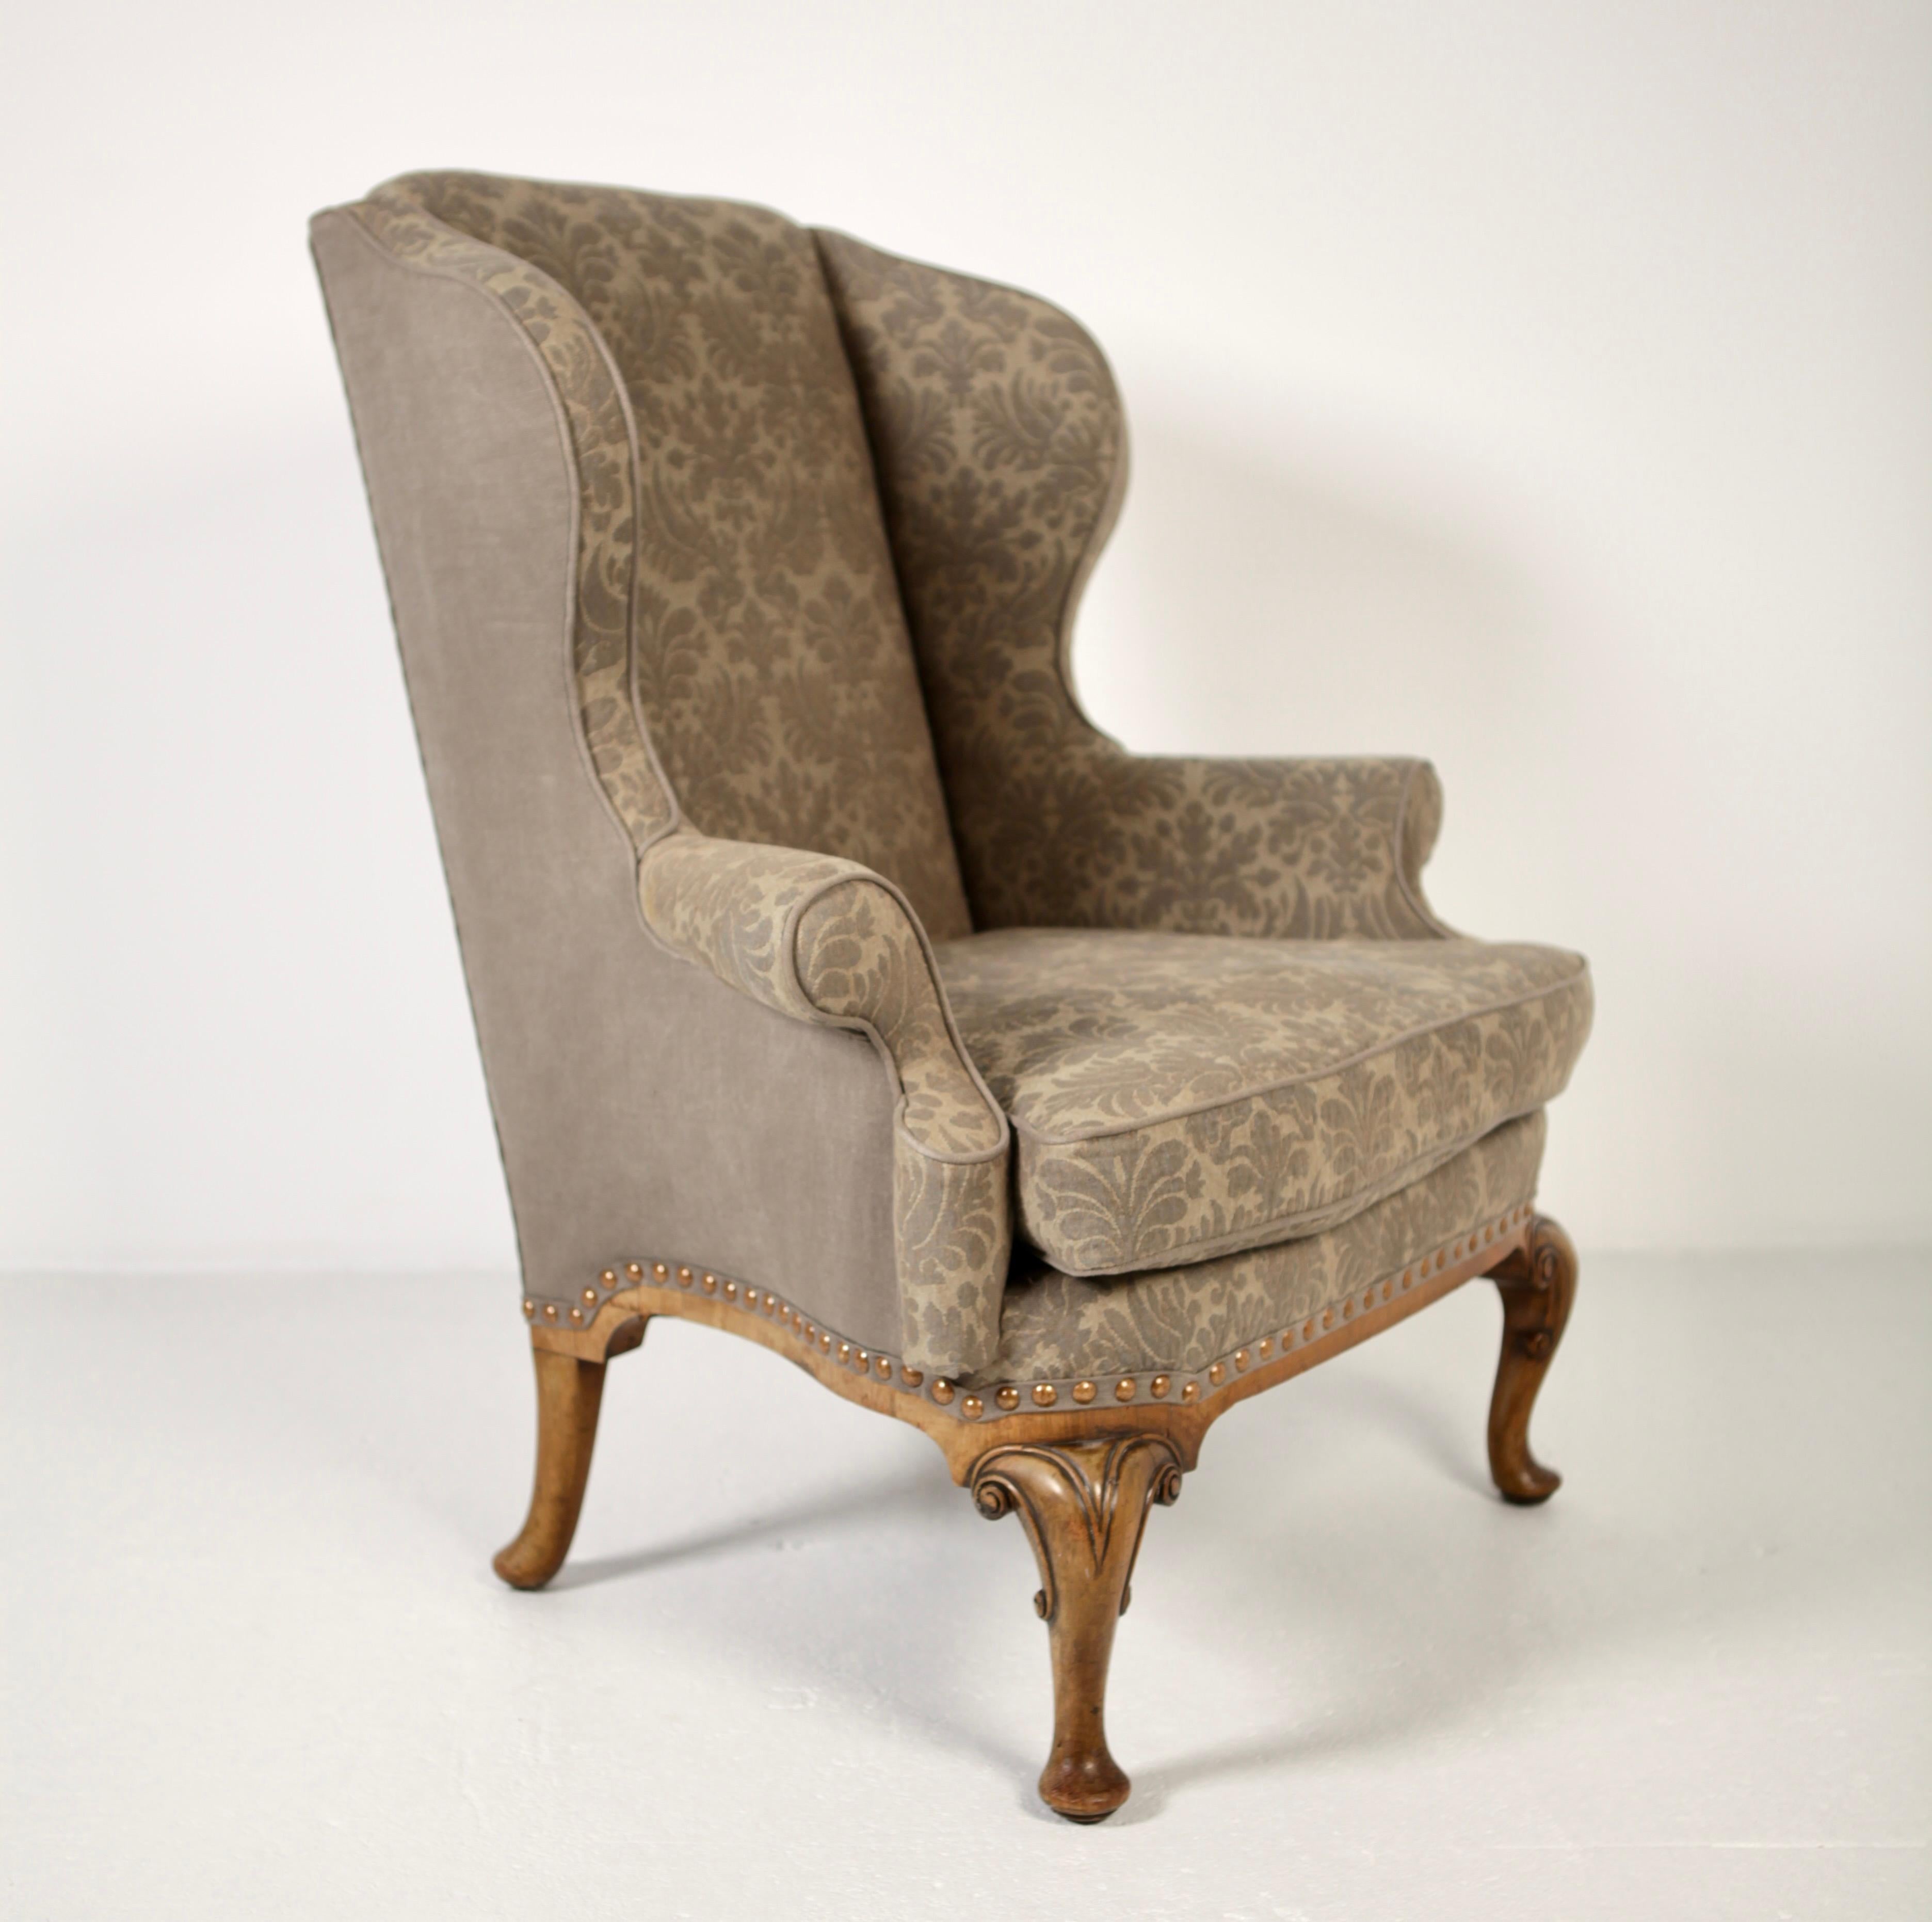 A fine English George II style walnut & linen upholstered framed wing-back armchair of excellent shape & proportions.
A chair of a particularly good shape and elegant form, being generous enough in proportions yet remaining compact in size.
New